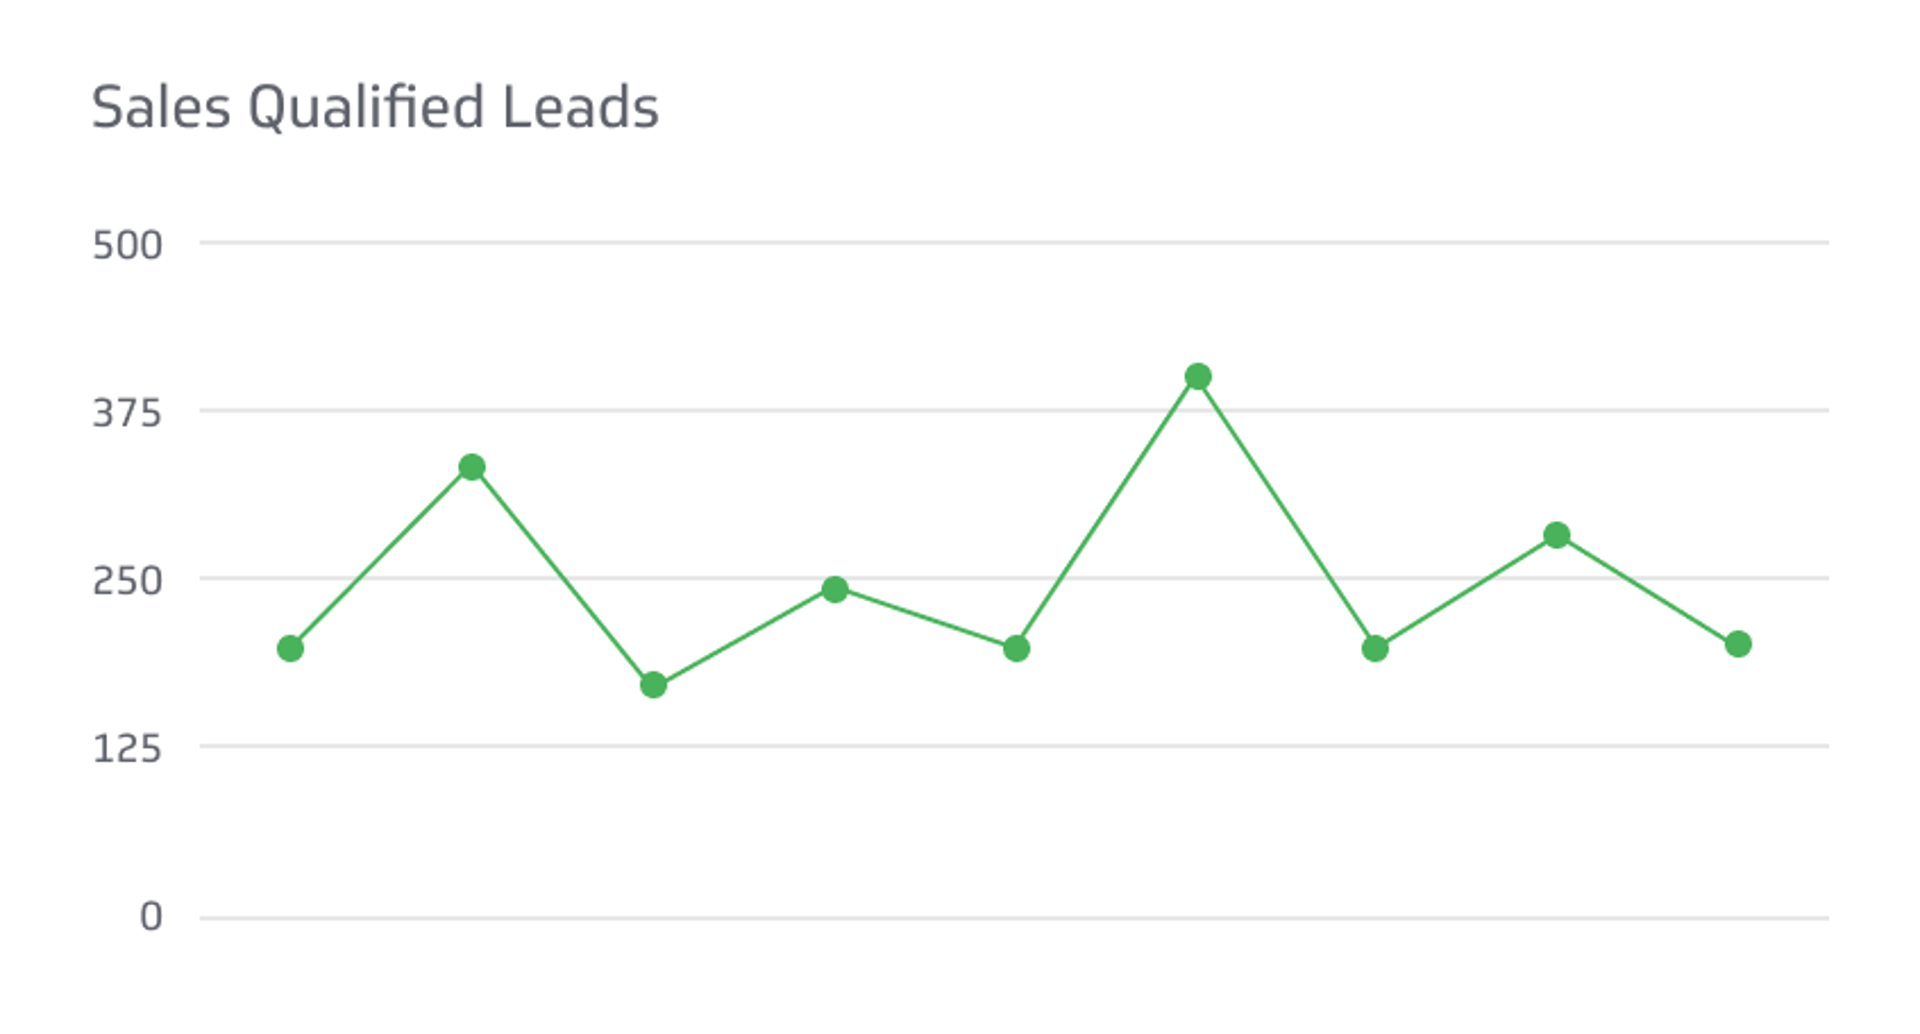 Related KPI Examples - Sales Qualified Lead (SQL) Metric